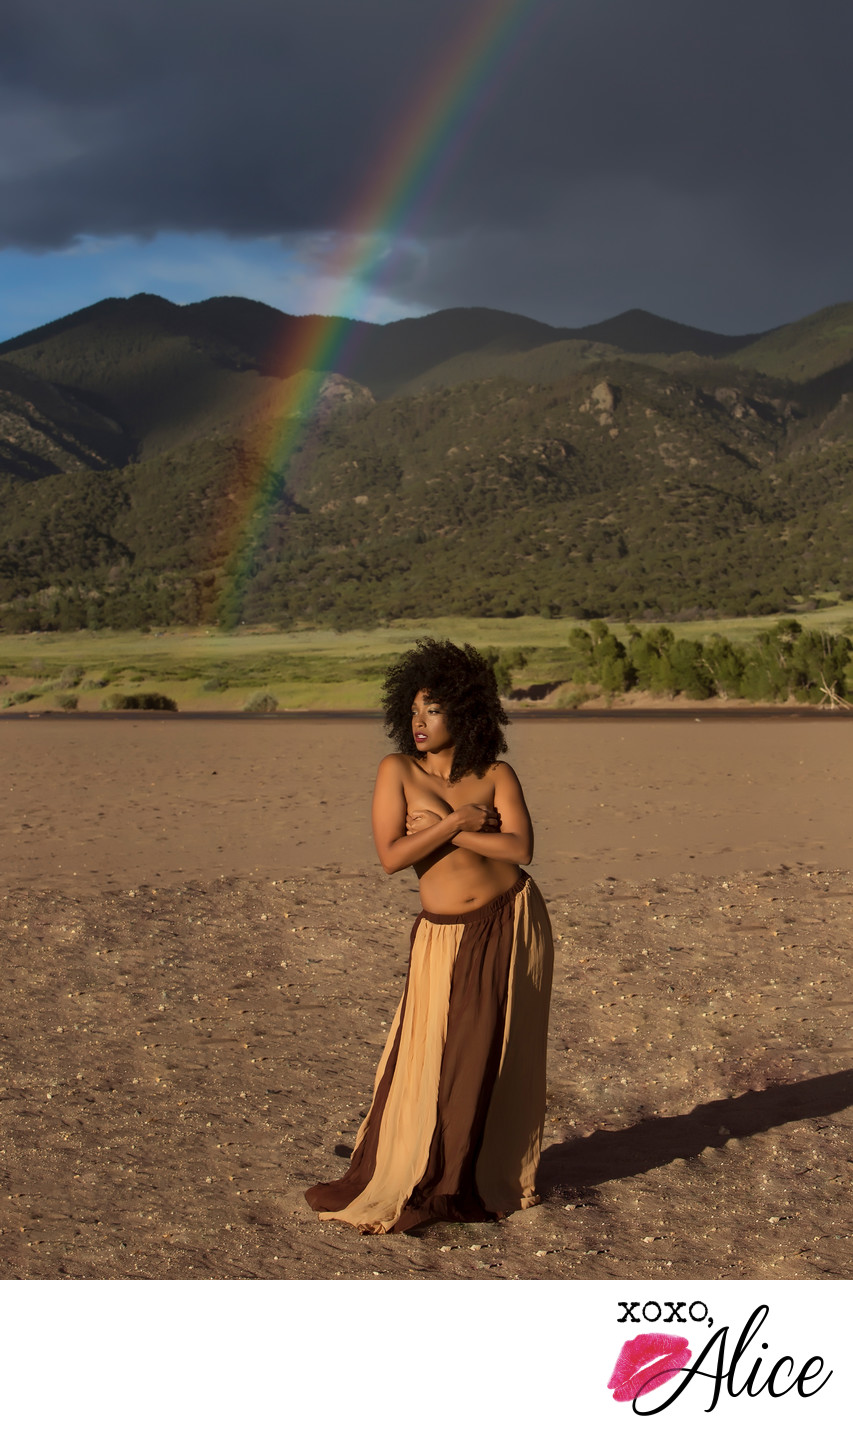 natural hair and rainbow nudes in nature XOXO Alice STL